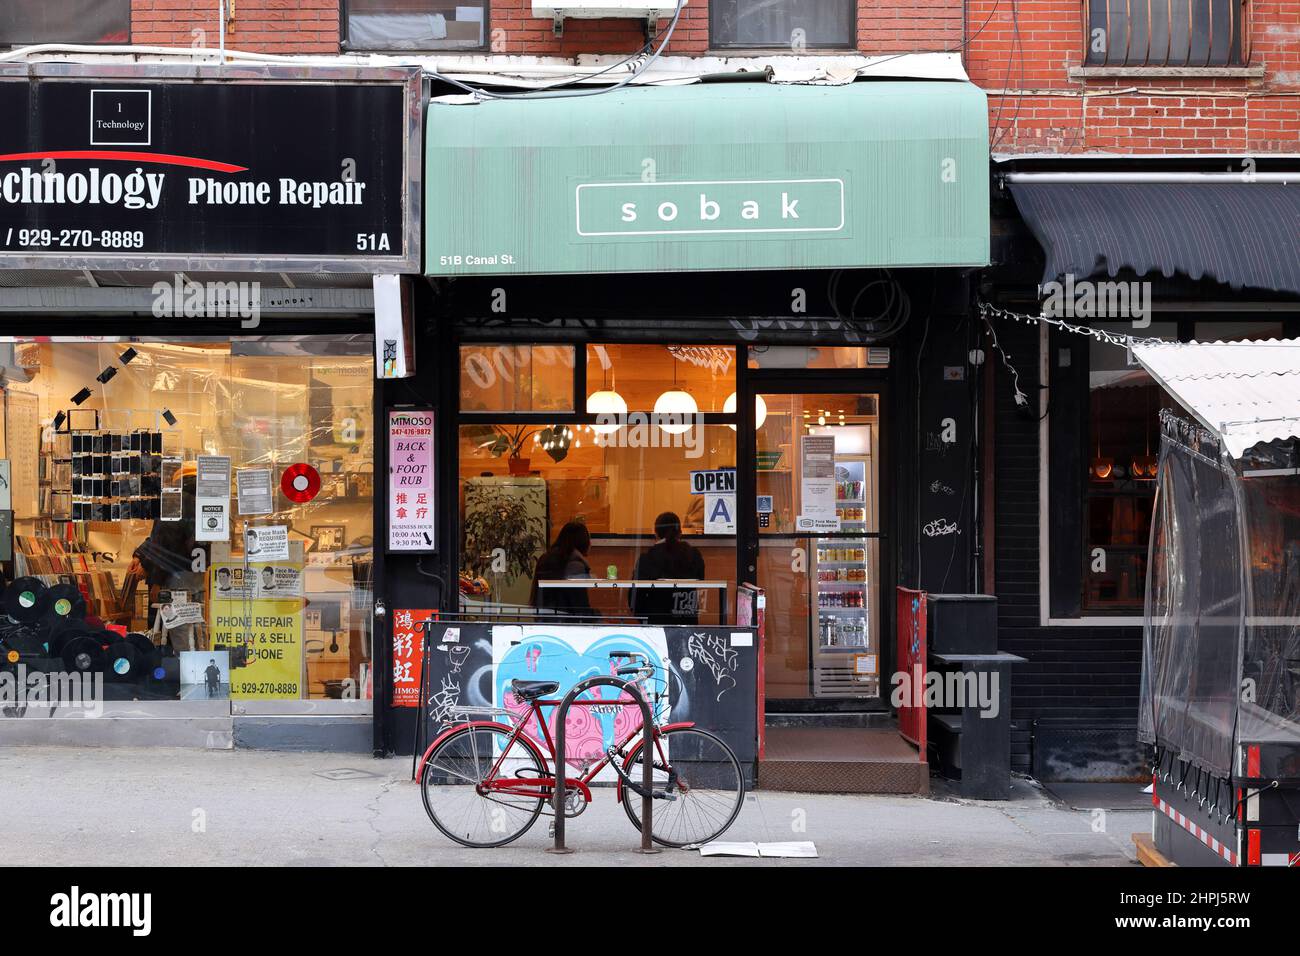 Sobak, 51b Canal St, New York, NY. exterior storefront of a Korean restaurant in the Lower East Side of Manhattan. Stock Photo